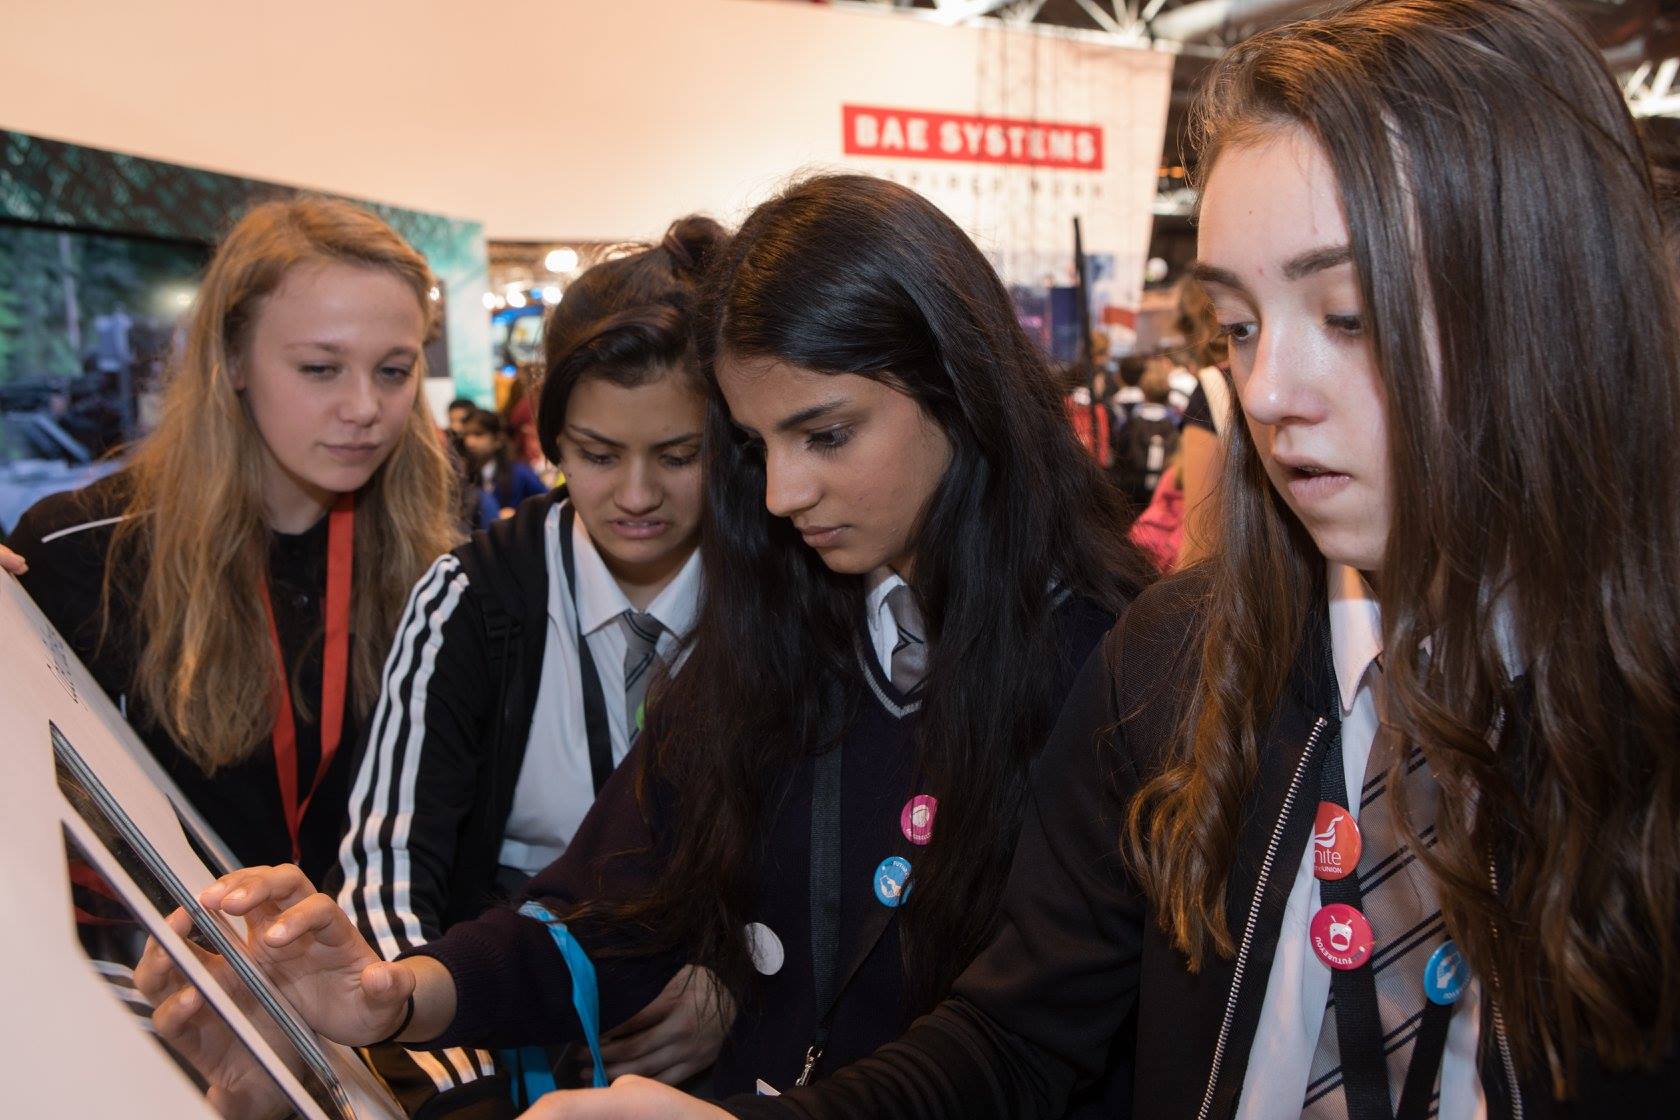 STEM students at BAE Systems trade show